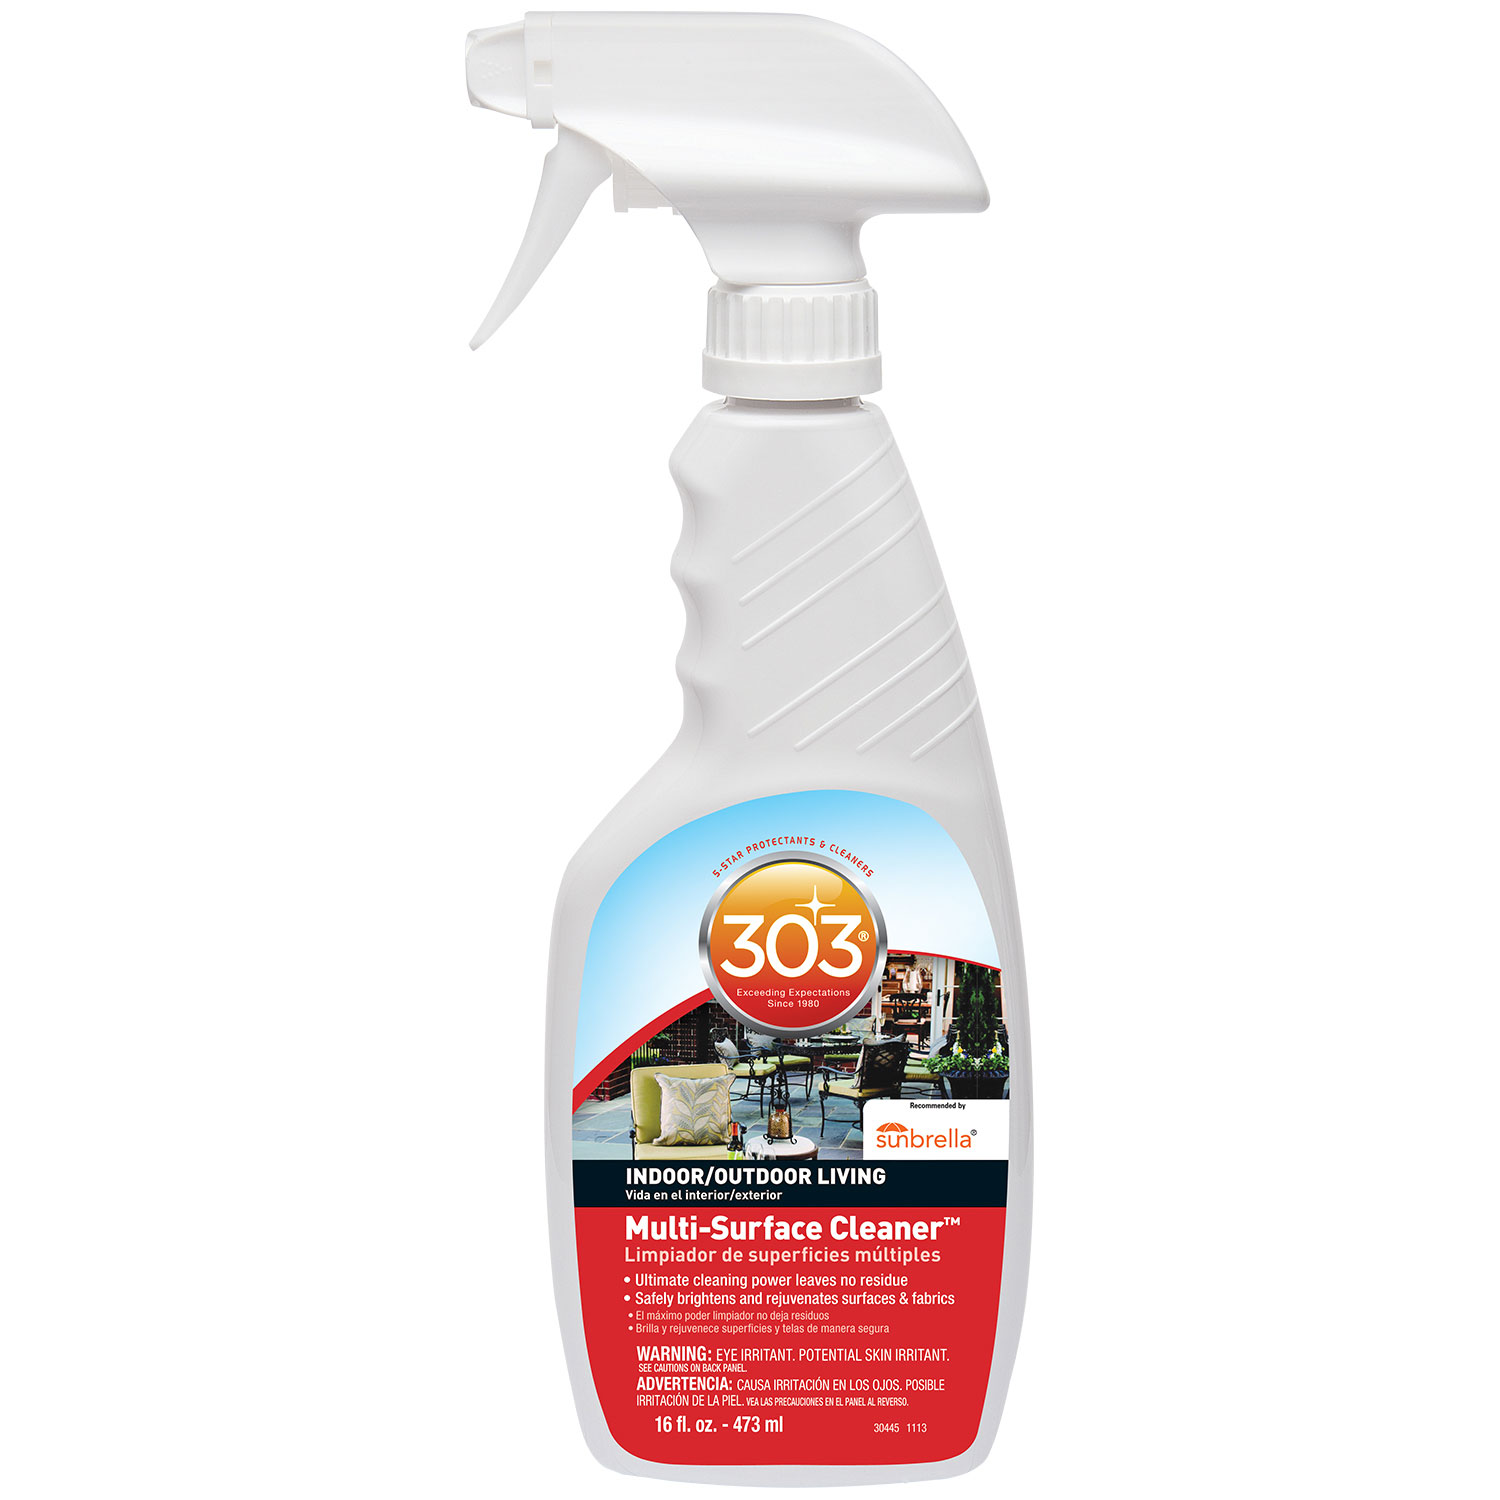 Cleaning Product, 303, Multi-Surface Cleaner, 16oz Spray Bottle